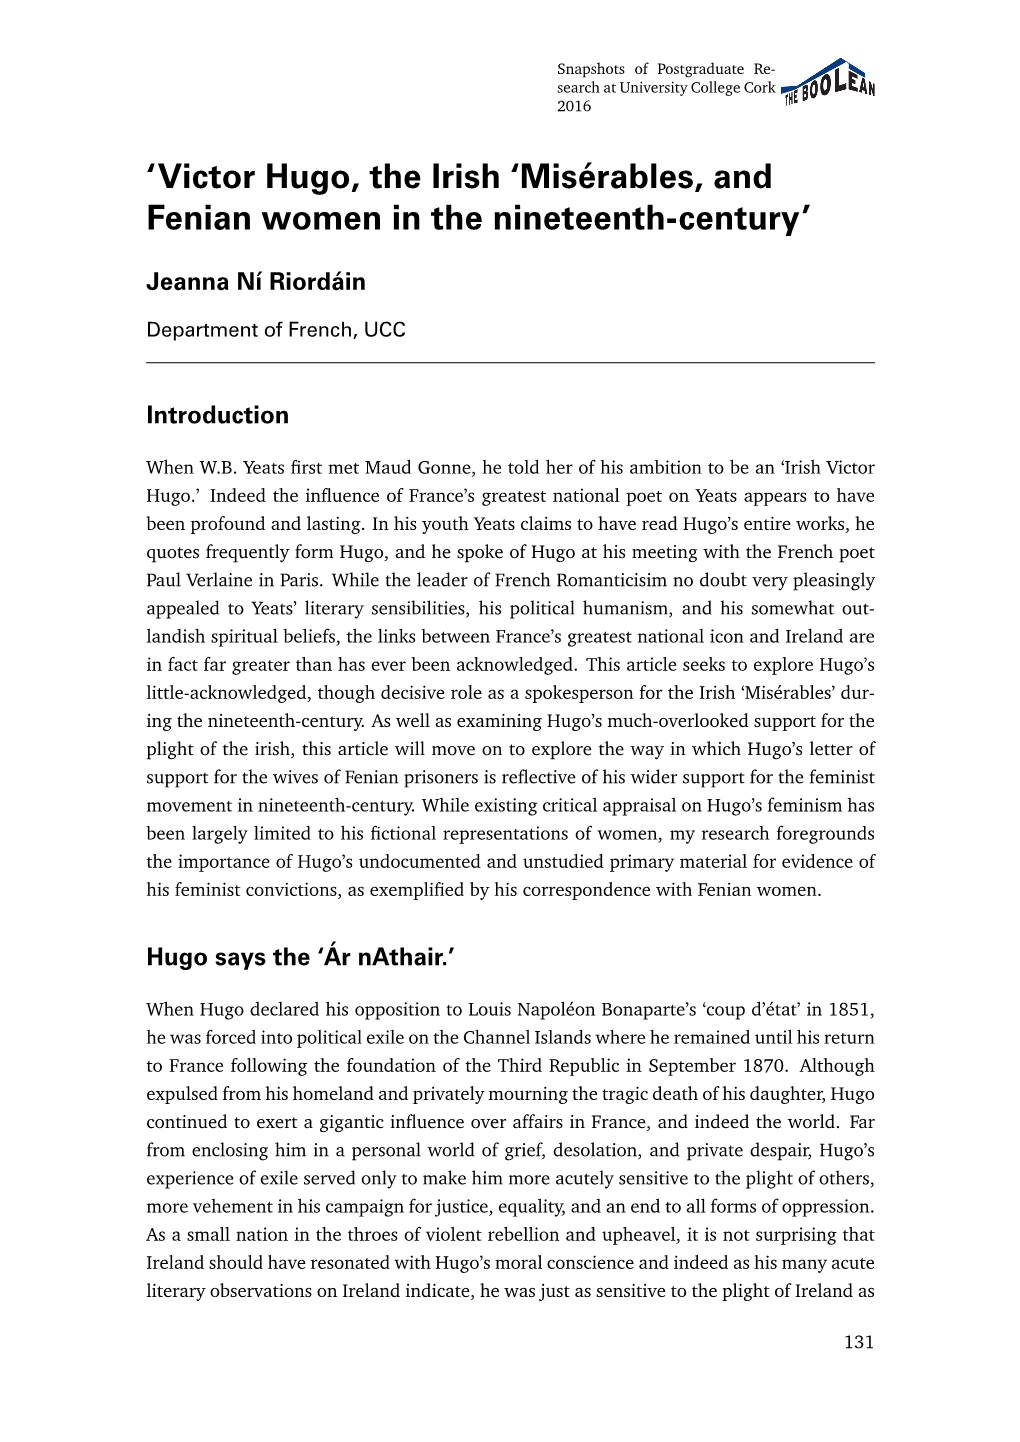 Victor Hugo, the Irish ‘Misérables, and Fenian Women in the Nineteenth-Century’